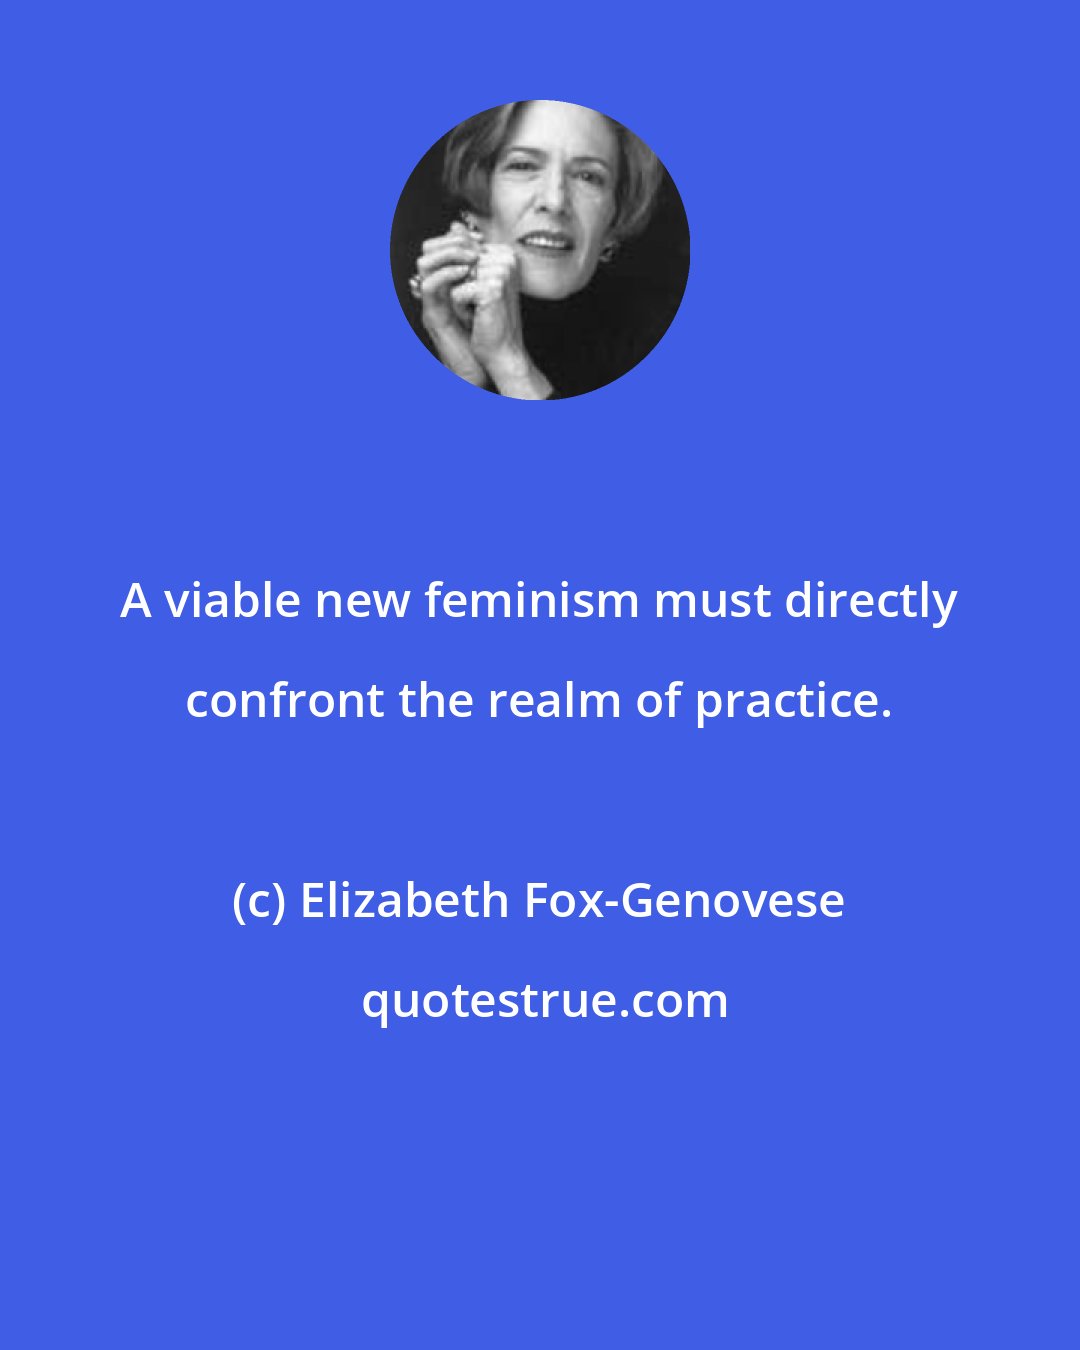 Elizabeth Fox-Genovese: A viable new feminism must directly confront the realm of practice.